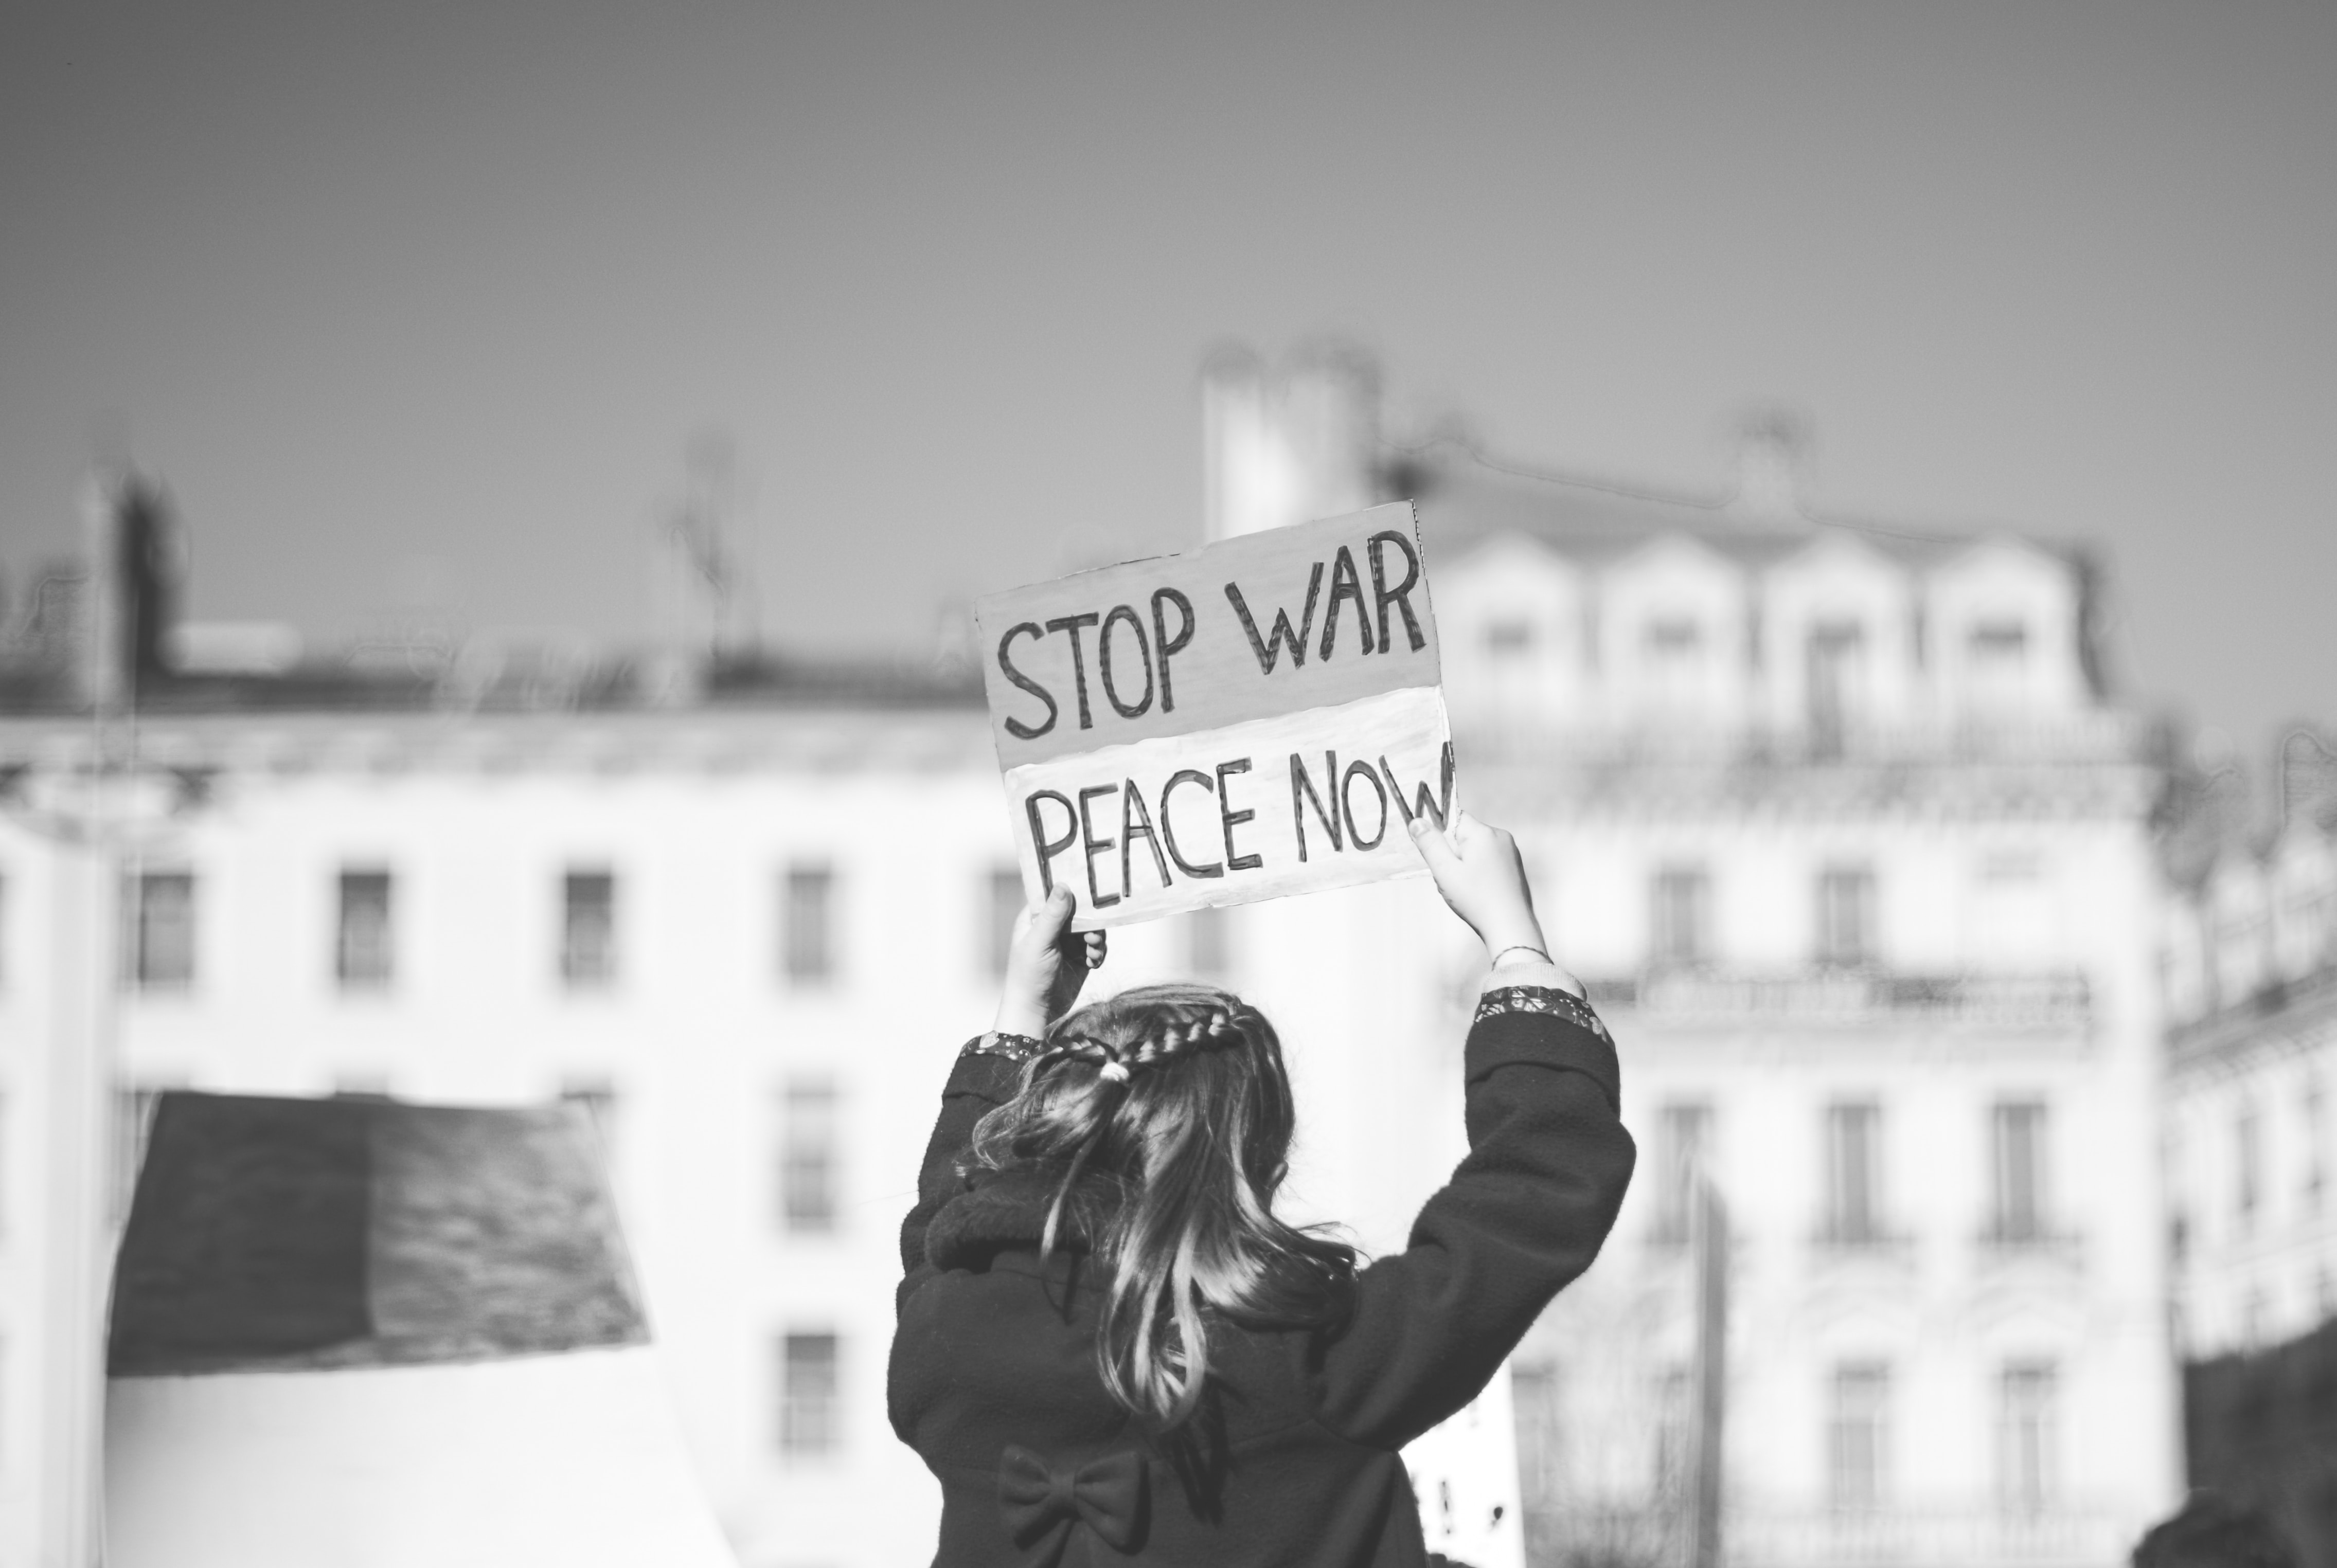 View from the back of a person holding a sign that says: "Stop war. peace now."